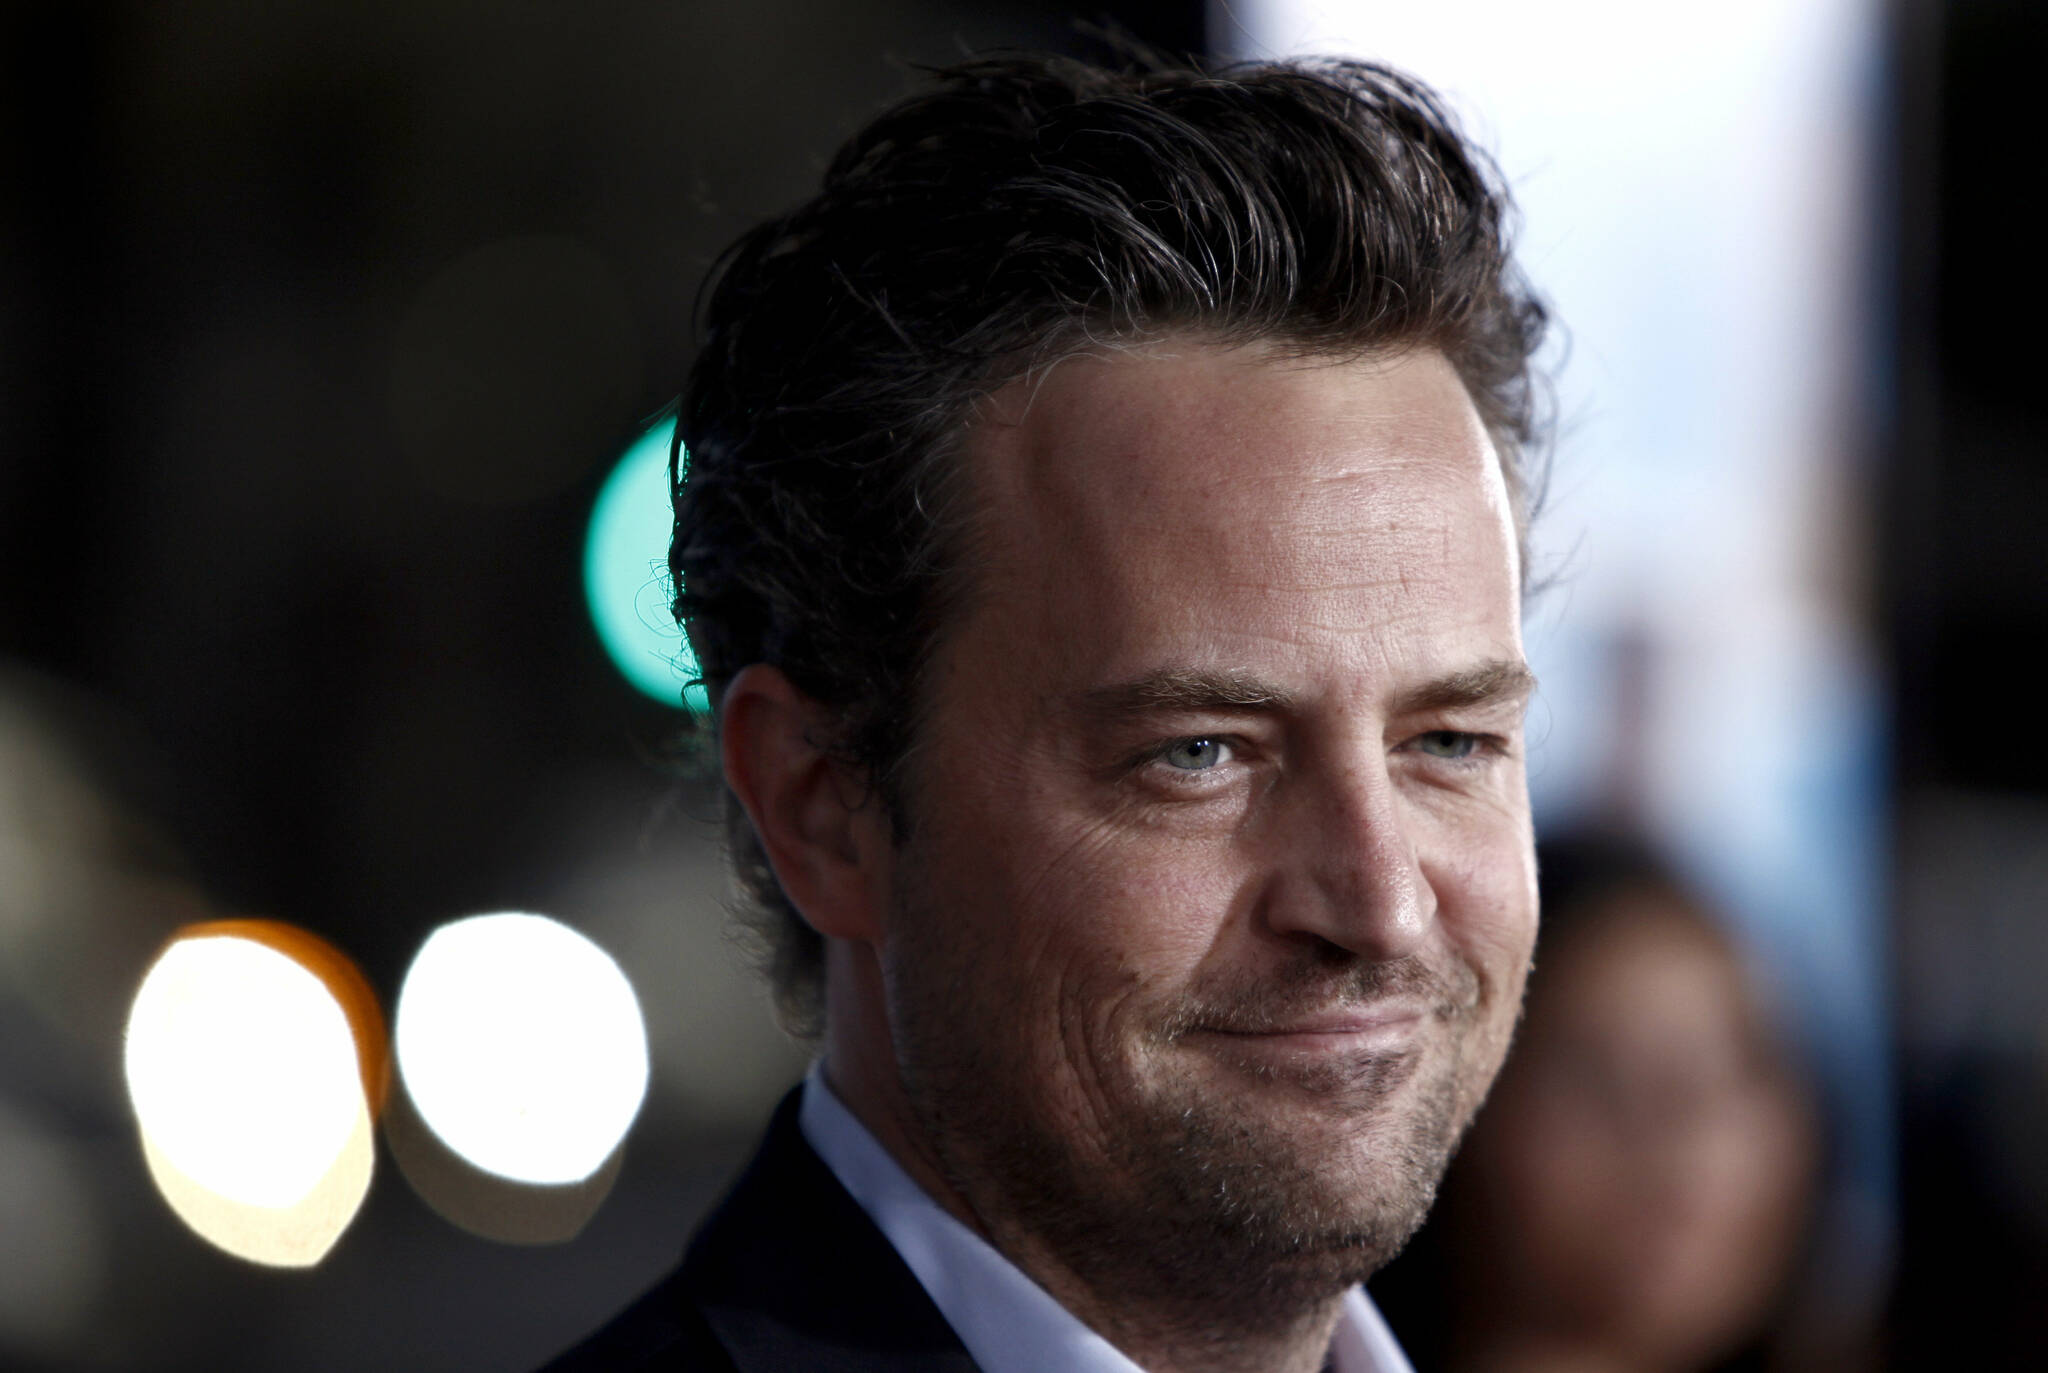 FILE - Matthew Perry arrives at the premiere of “The Invention of Lying” in Los Angeles on Sept. 21, 2009. Perry turns 52 on Aug. 19. (AP Photo/Matt Sayles, File)